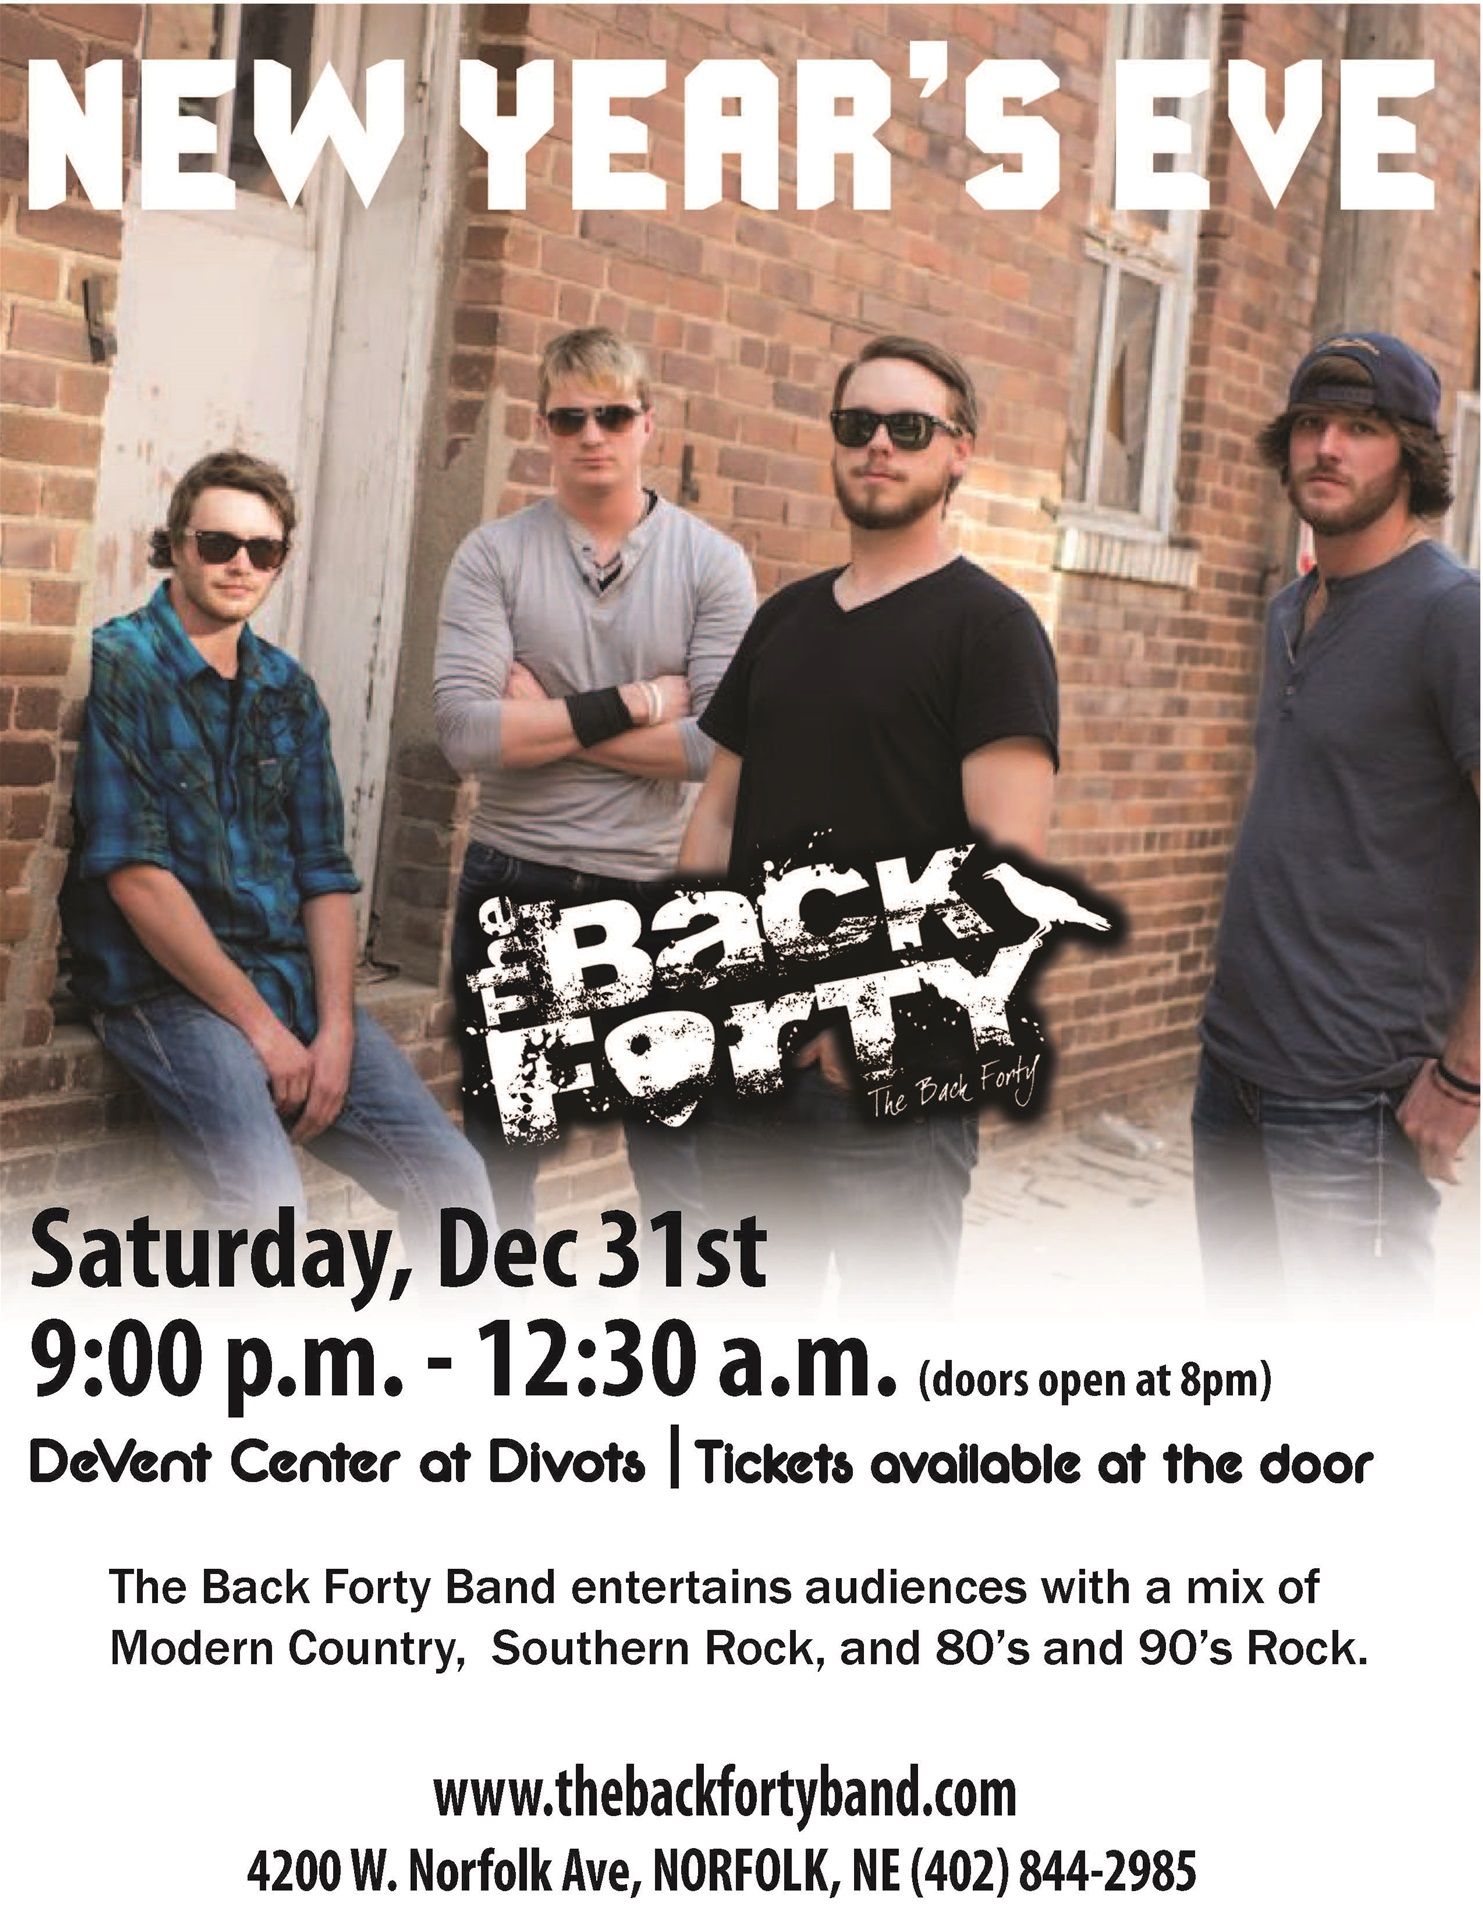 Live Music featuring The Back Forty at 
						Divots DeVent Center in Norfolk, Nebraska - 
						Northeast Nebraska Musicians The Back Forty   
						performing live at
						Divots DeVent Center in Norfolk, Nebraska  
						on New Years Eve, Saturday, December 31, 2016.
						Divots DeVent Center is located at 
						4200 W Norfolk Avenue, 
						Norfolk, NE 68701, 
						Phone: (402) 371-4520.